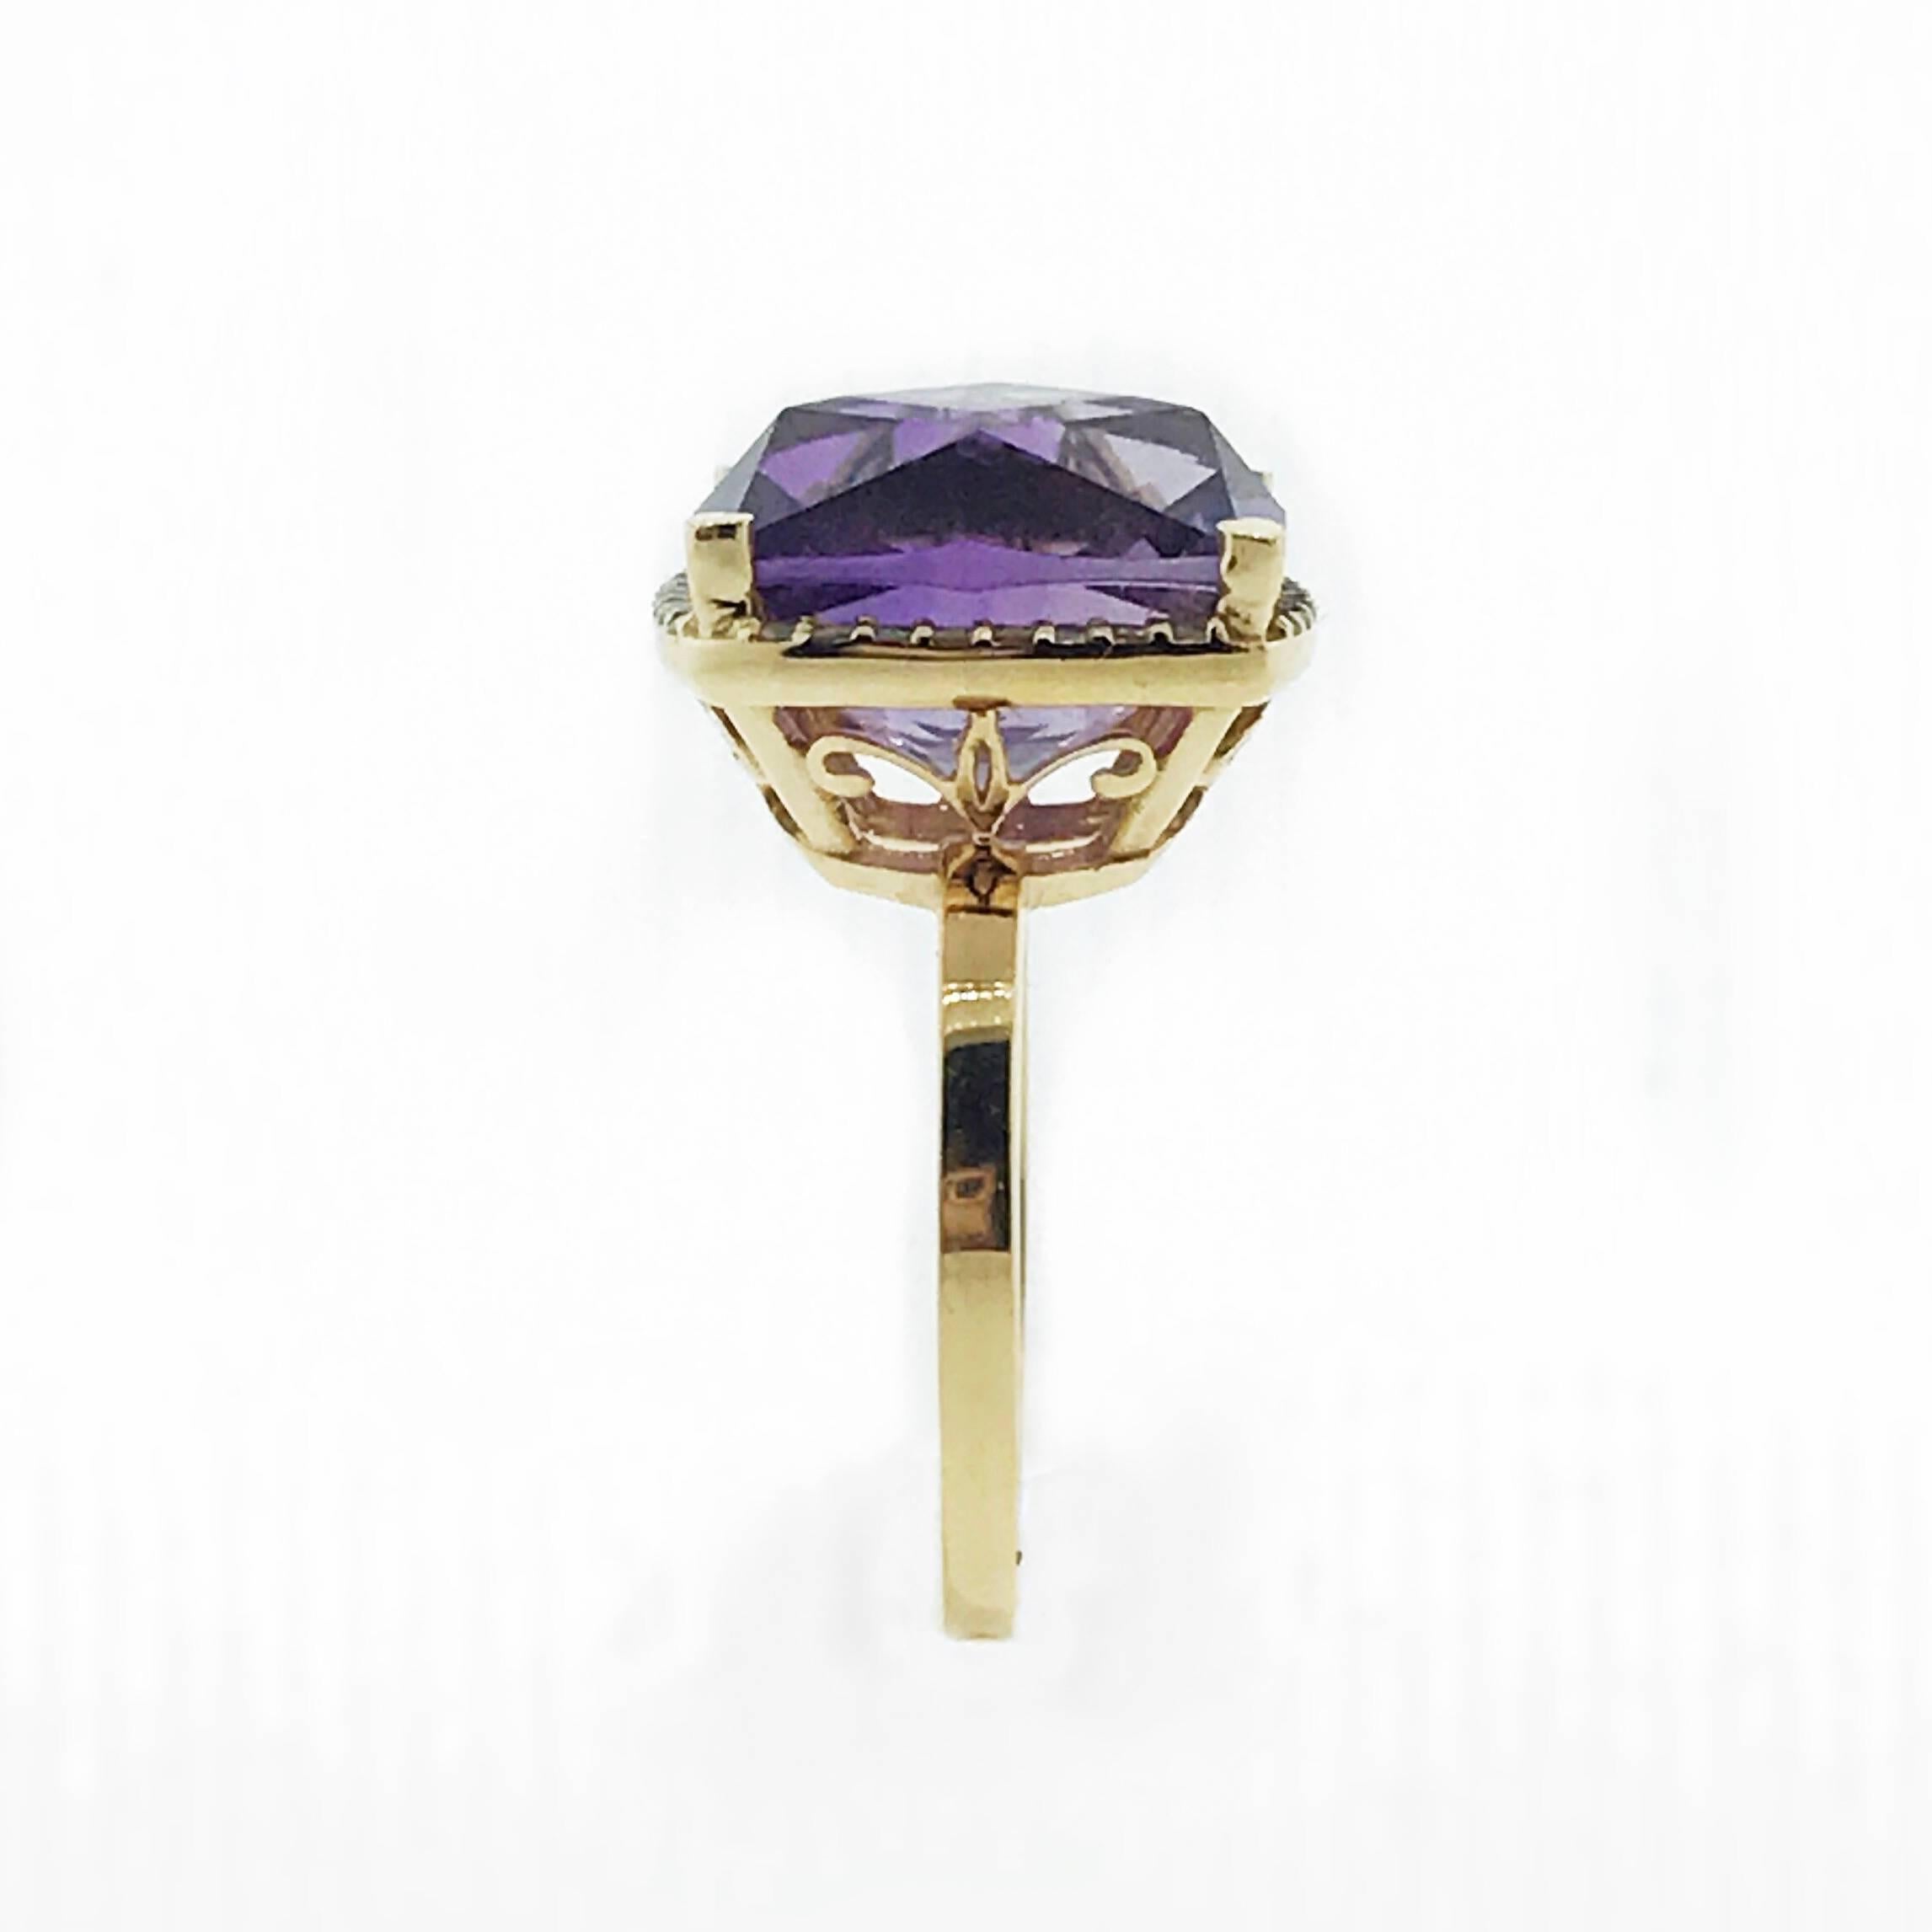 Stunning Square Cut Amethyst in an 18k Rose Gold setting with 0.23 Carats of Round Diamonds. Designed and created by West Coast jewelry designer Lisa Nik and featured at the the luxury jewelry boutique Marisa Perry Atelier in New York City's West